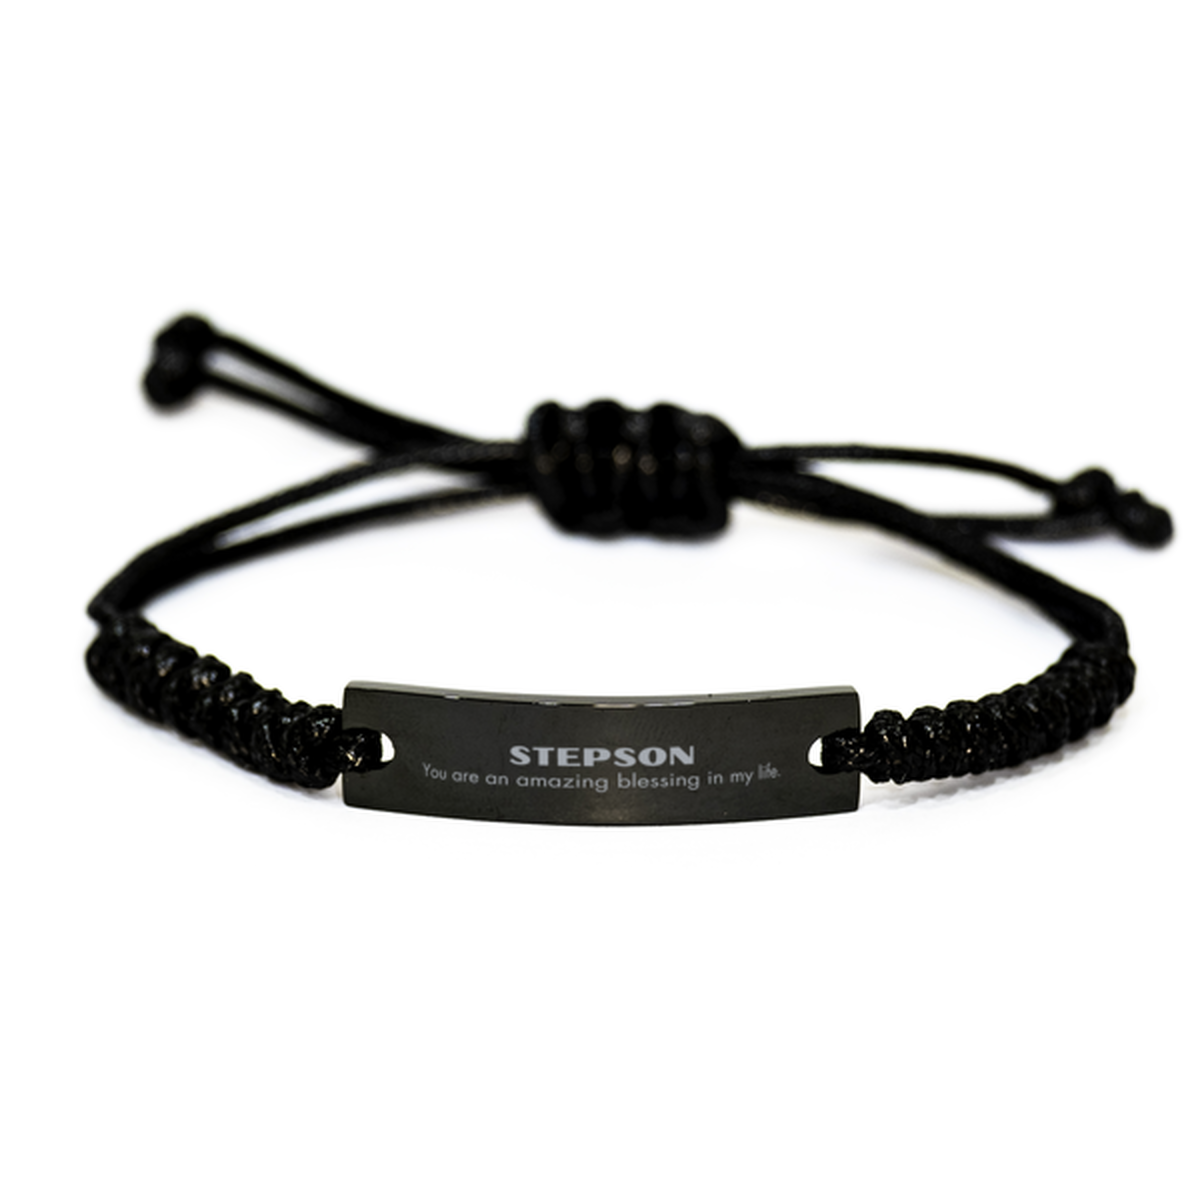 Stepson Black Rope Bracelet, You are an amazing blessing in my life, Thank You Gifts For Stepson, Inspirational Birthday Christmas Unique Gifts For Stepson